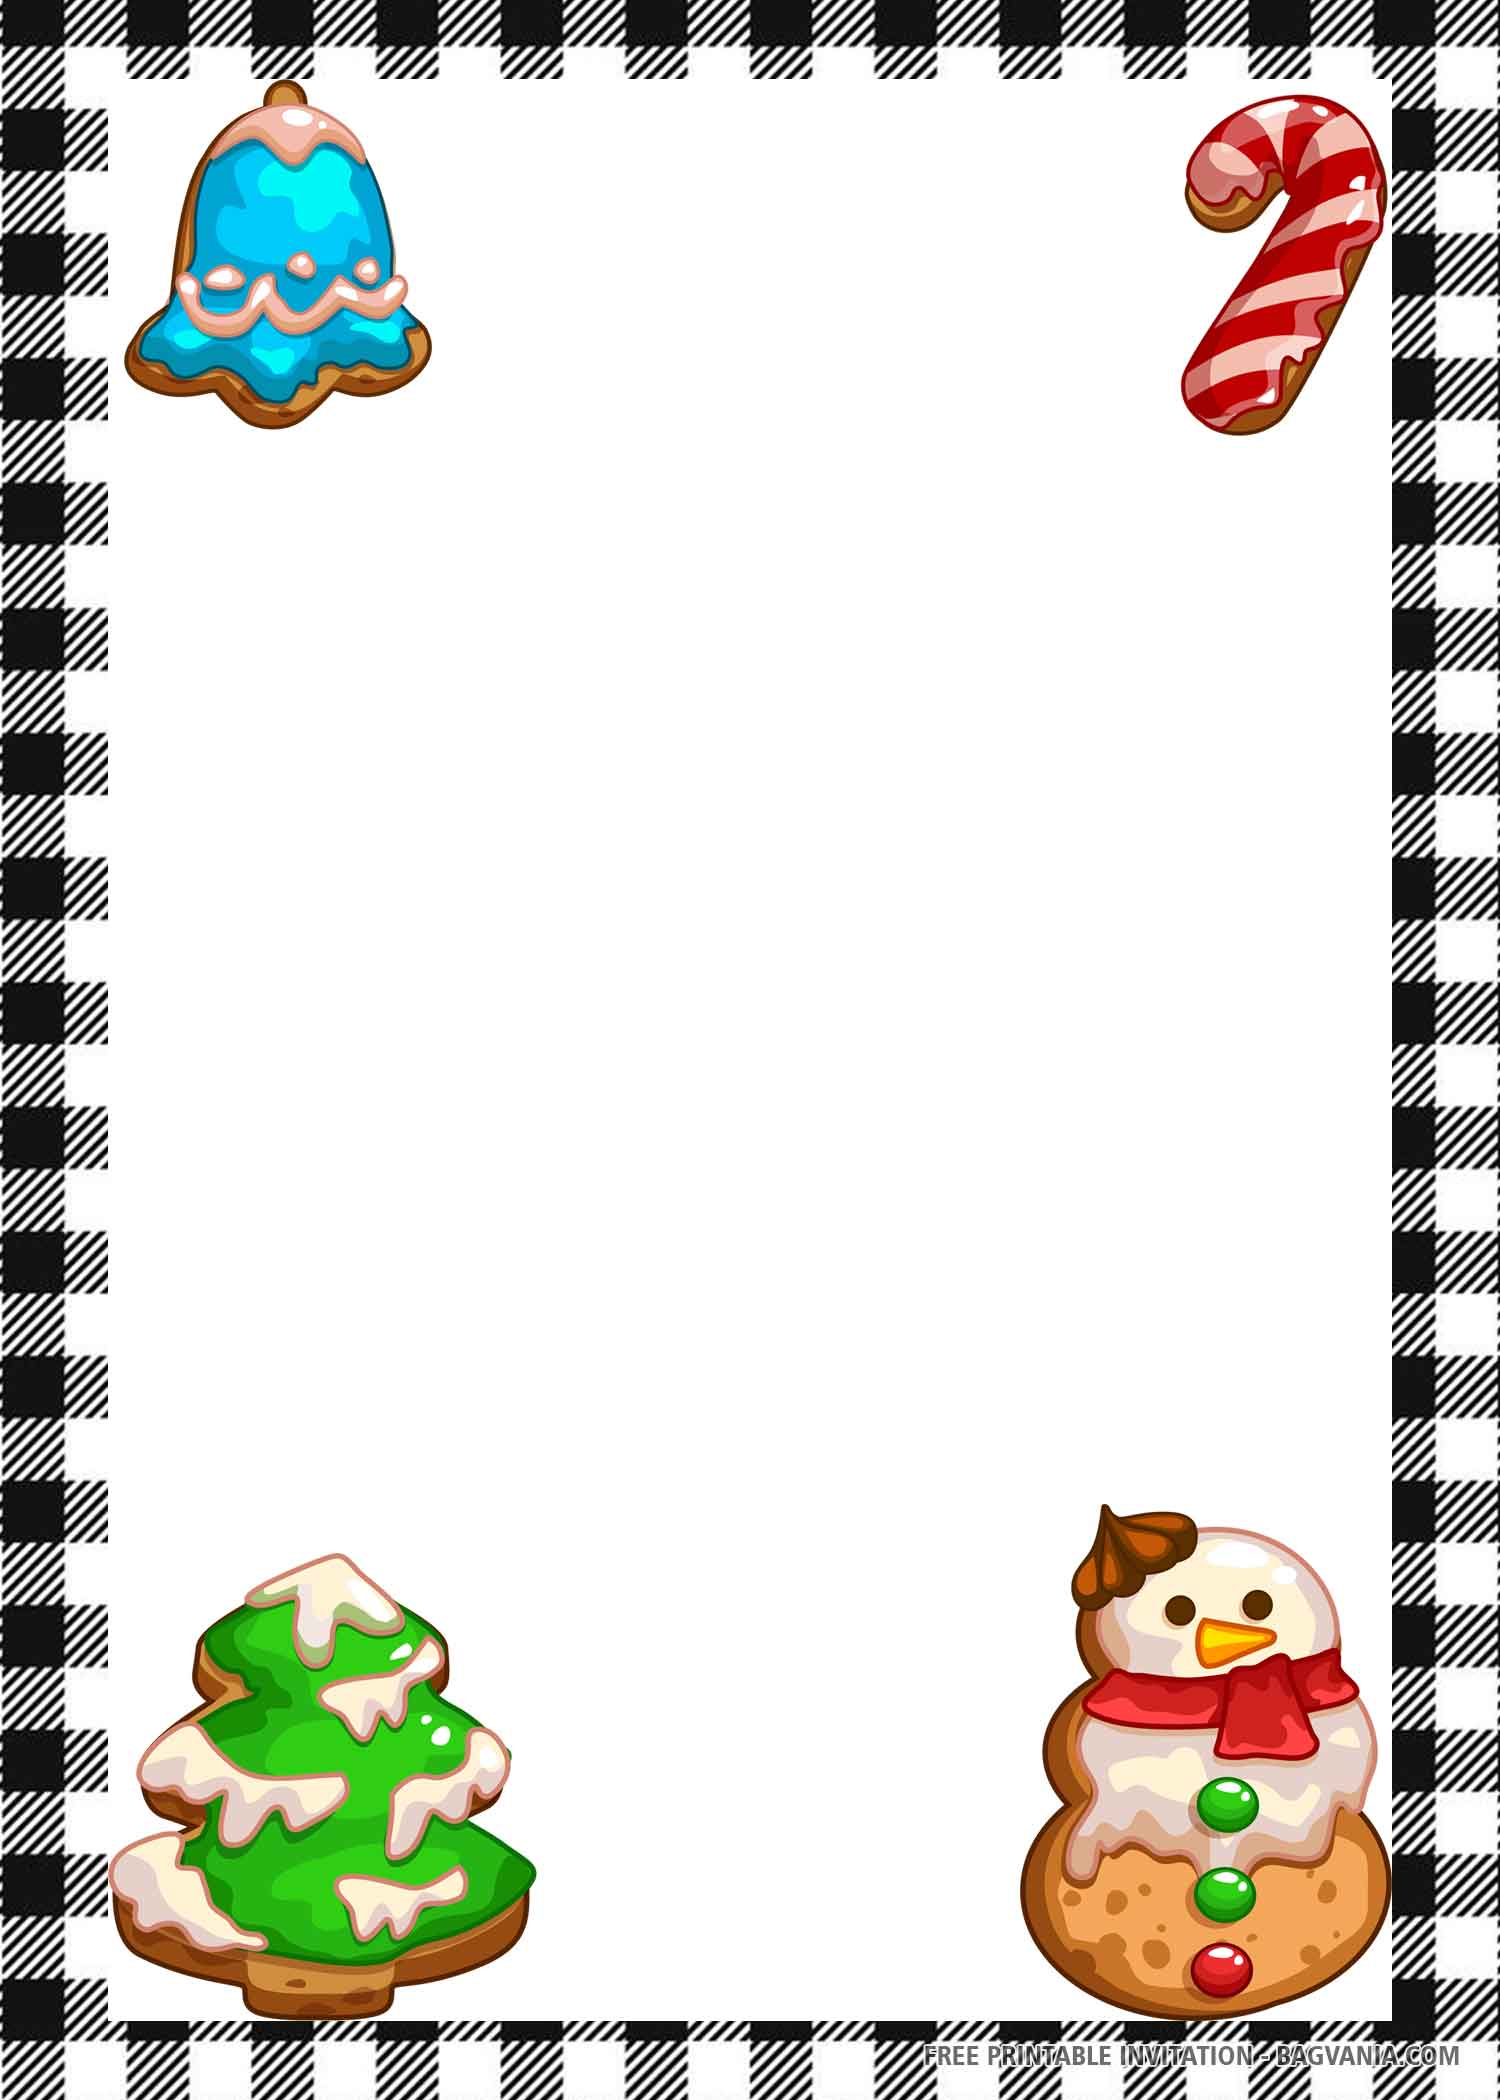 FREE Christmas Cookies with Bell, Stick, Pine Tree, and Snowman